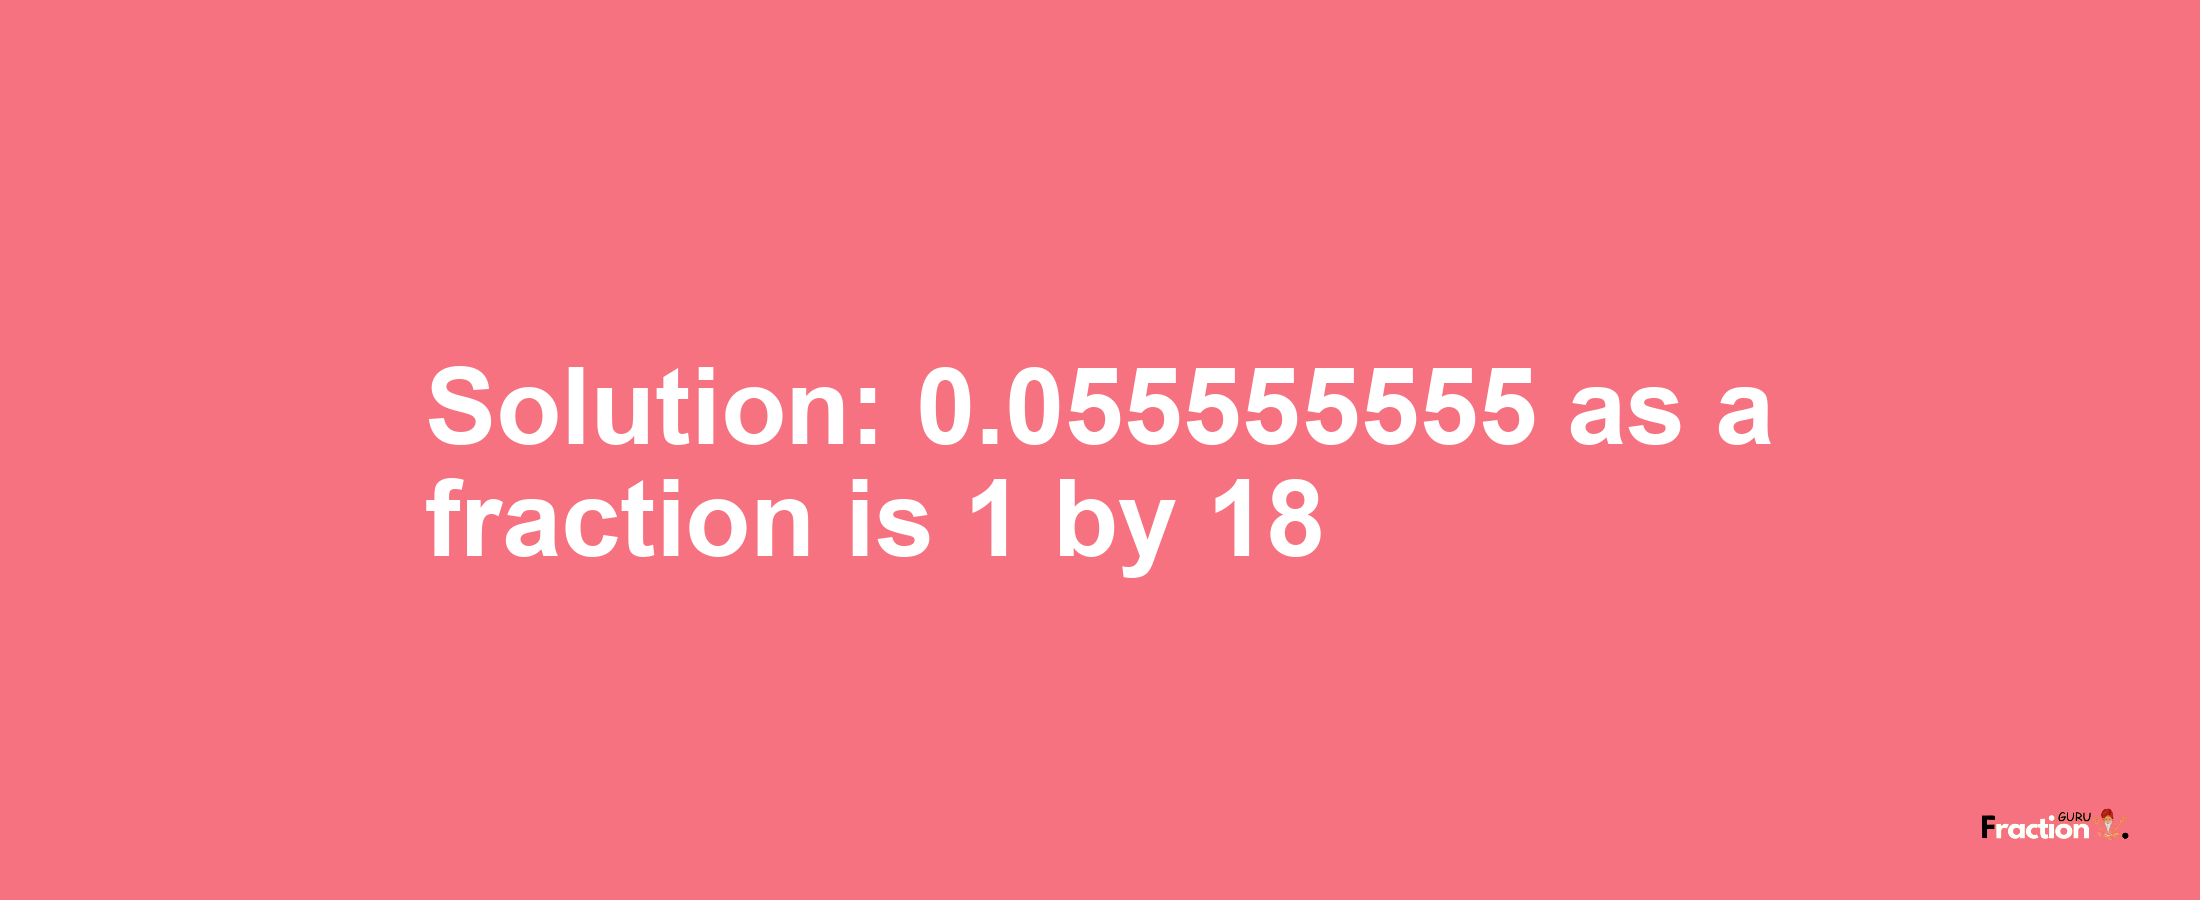 Solution:0.055555555 as a fraction is 1/18